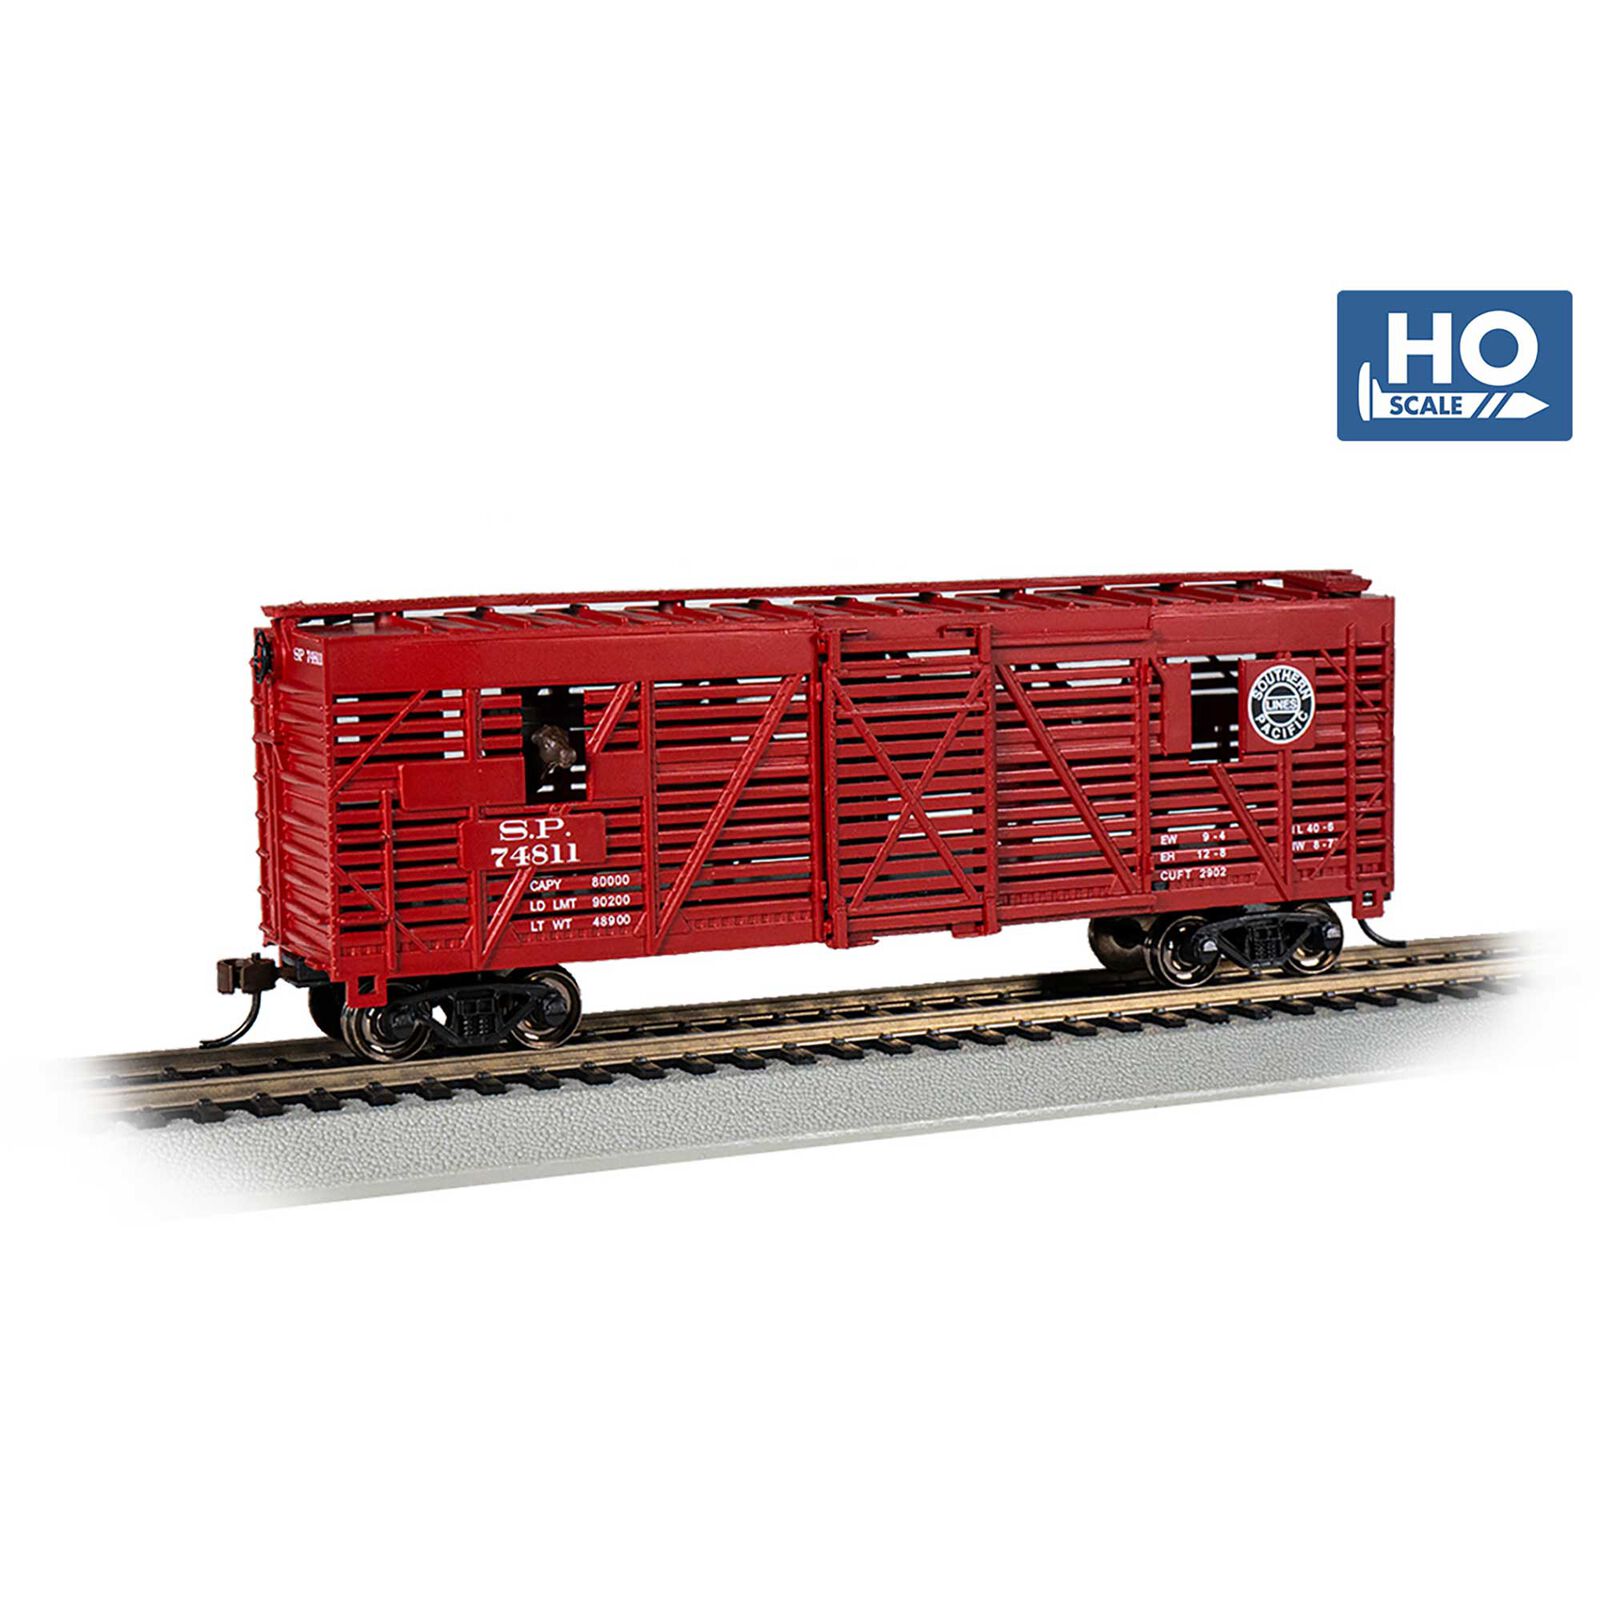 HO STOCK CAR SOUTHERN PACIFIC #74811 with CATTLE